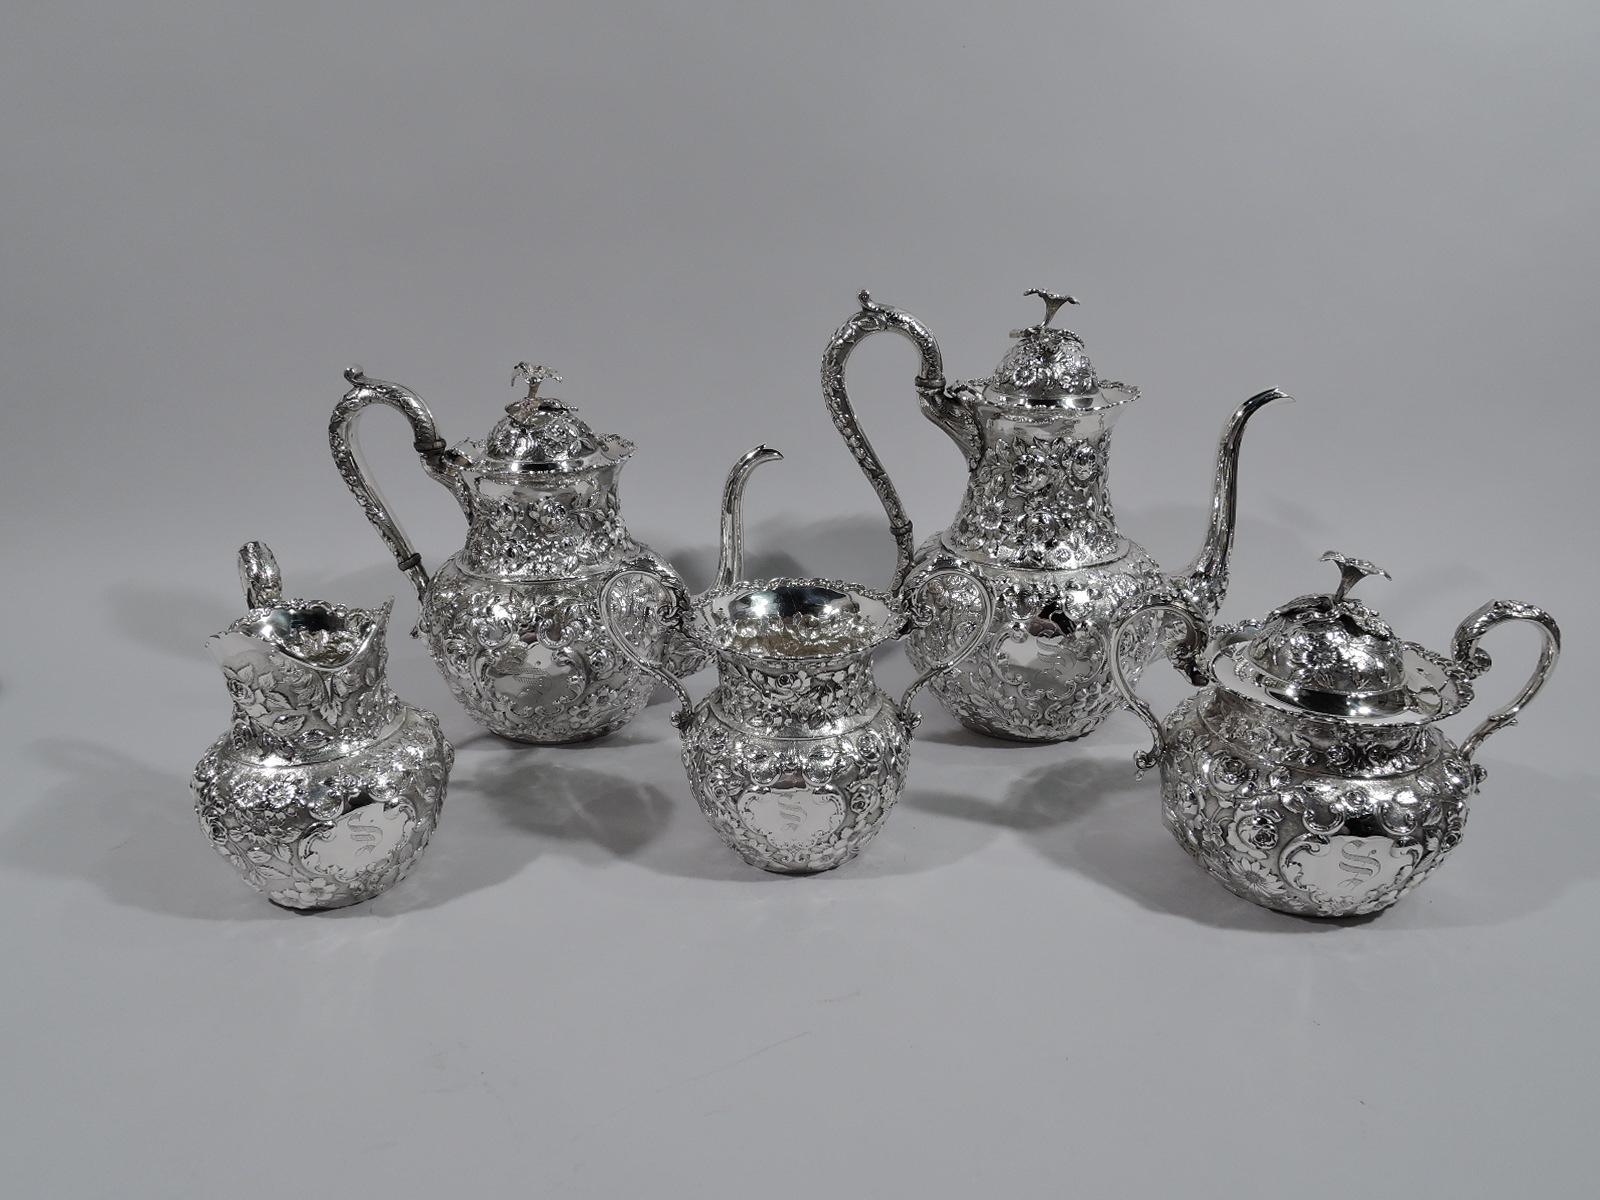 Five-piece sterling silver tea and coffee set with floral repousse. Made by AG Schultz & Co. in Baltimore, circa 1910. This set comprises coffeepot, teapot, creamer, sugar, and waste bowl.

Each: Round with high-looping leaf-capped S-scroll